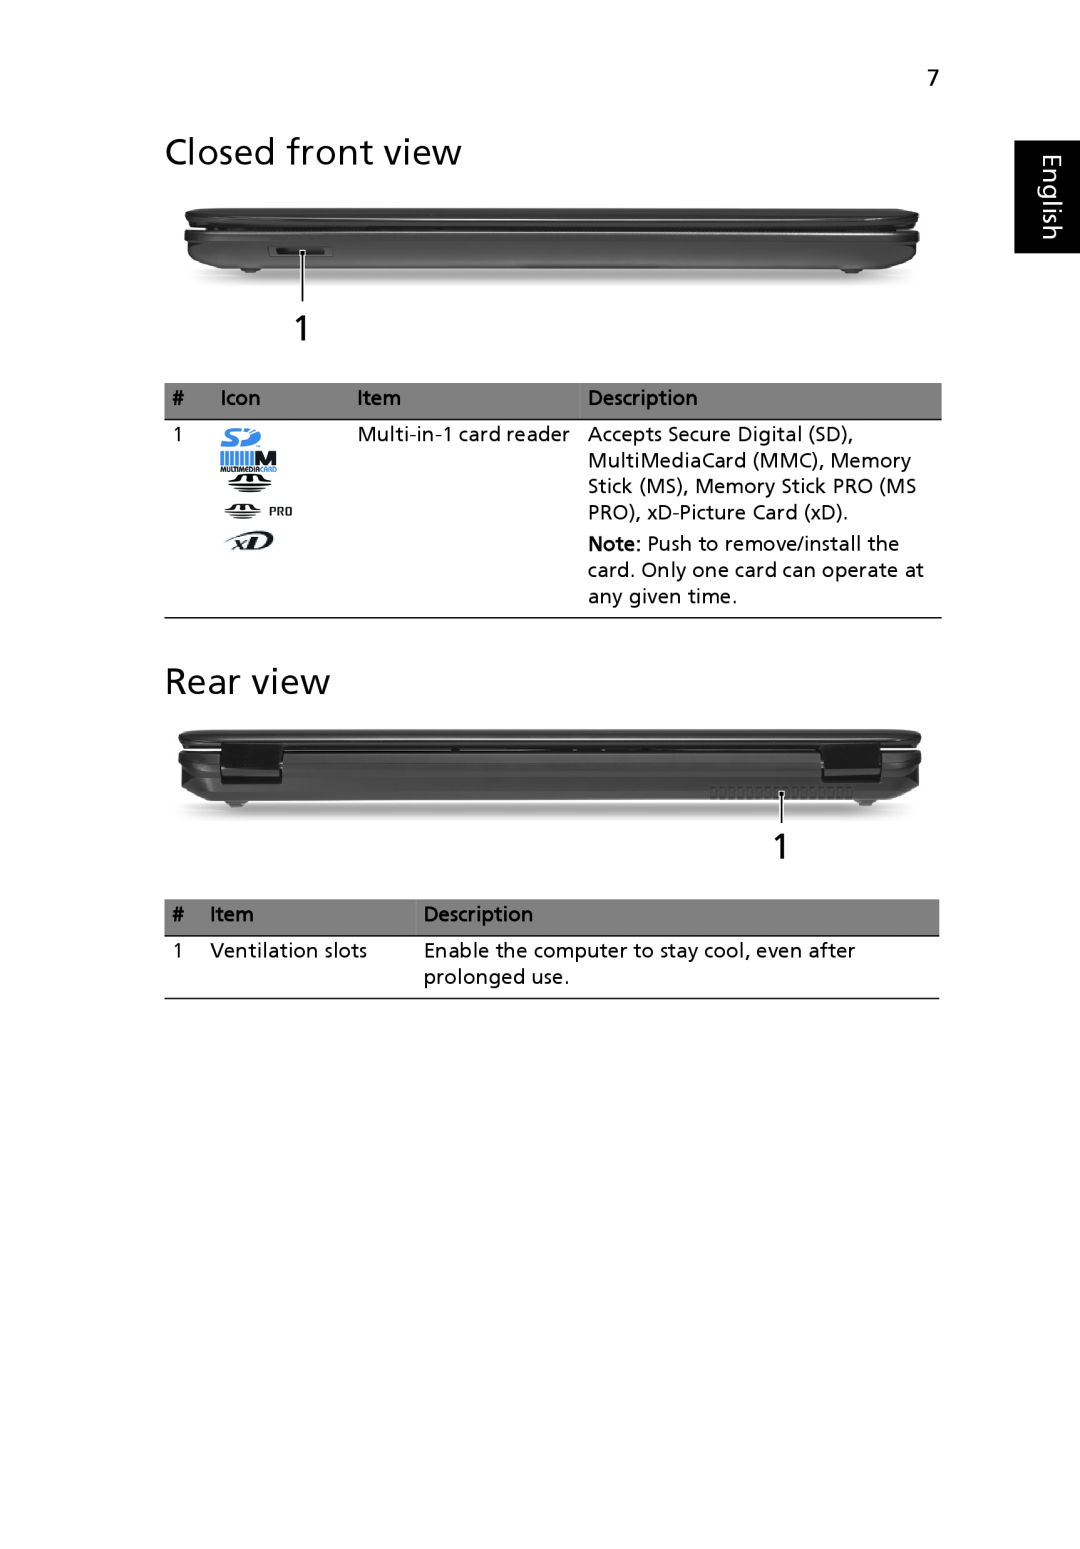 Acer 7540 Series manual Closed front view, Rear view, English 